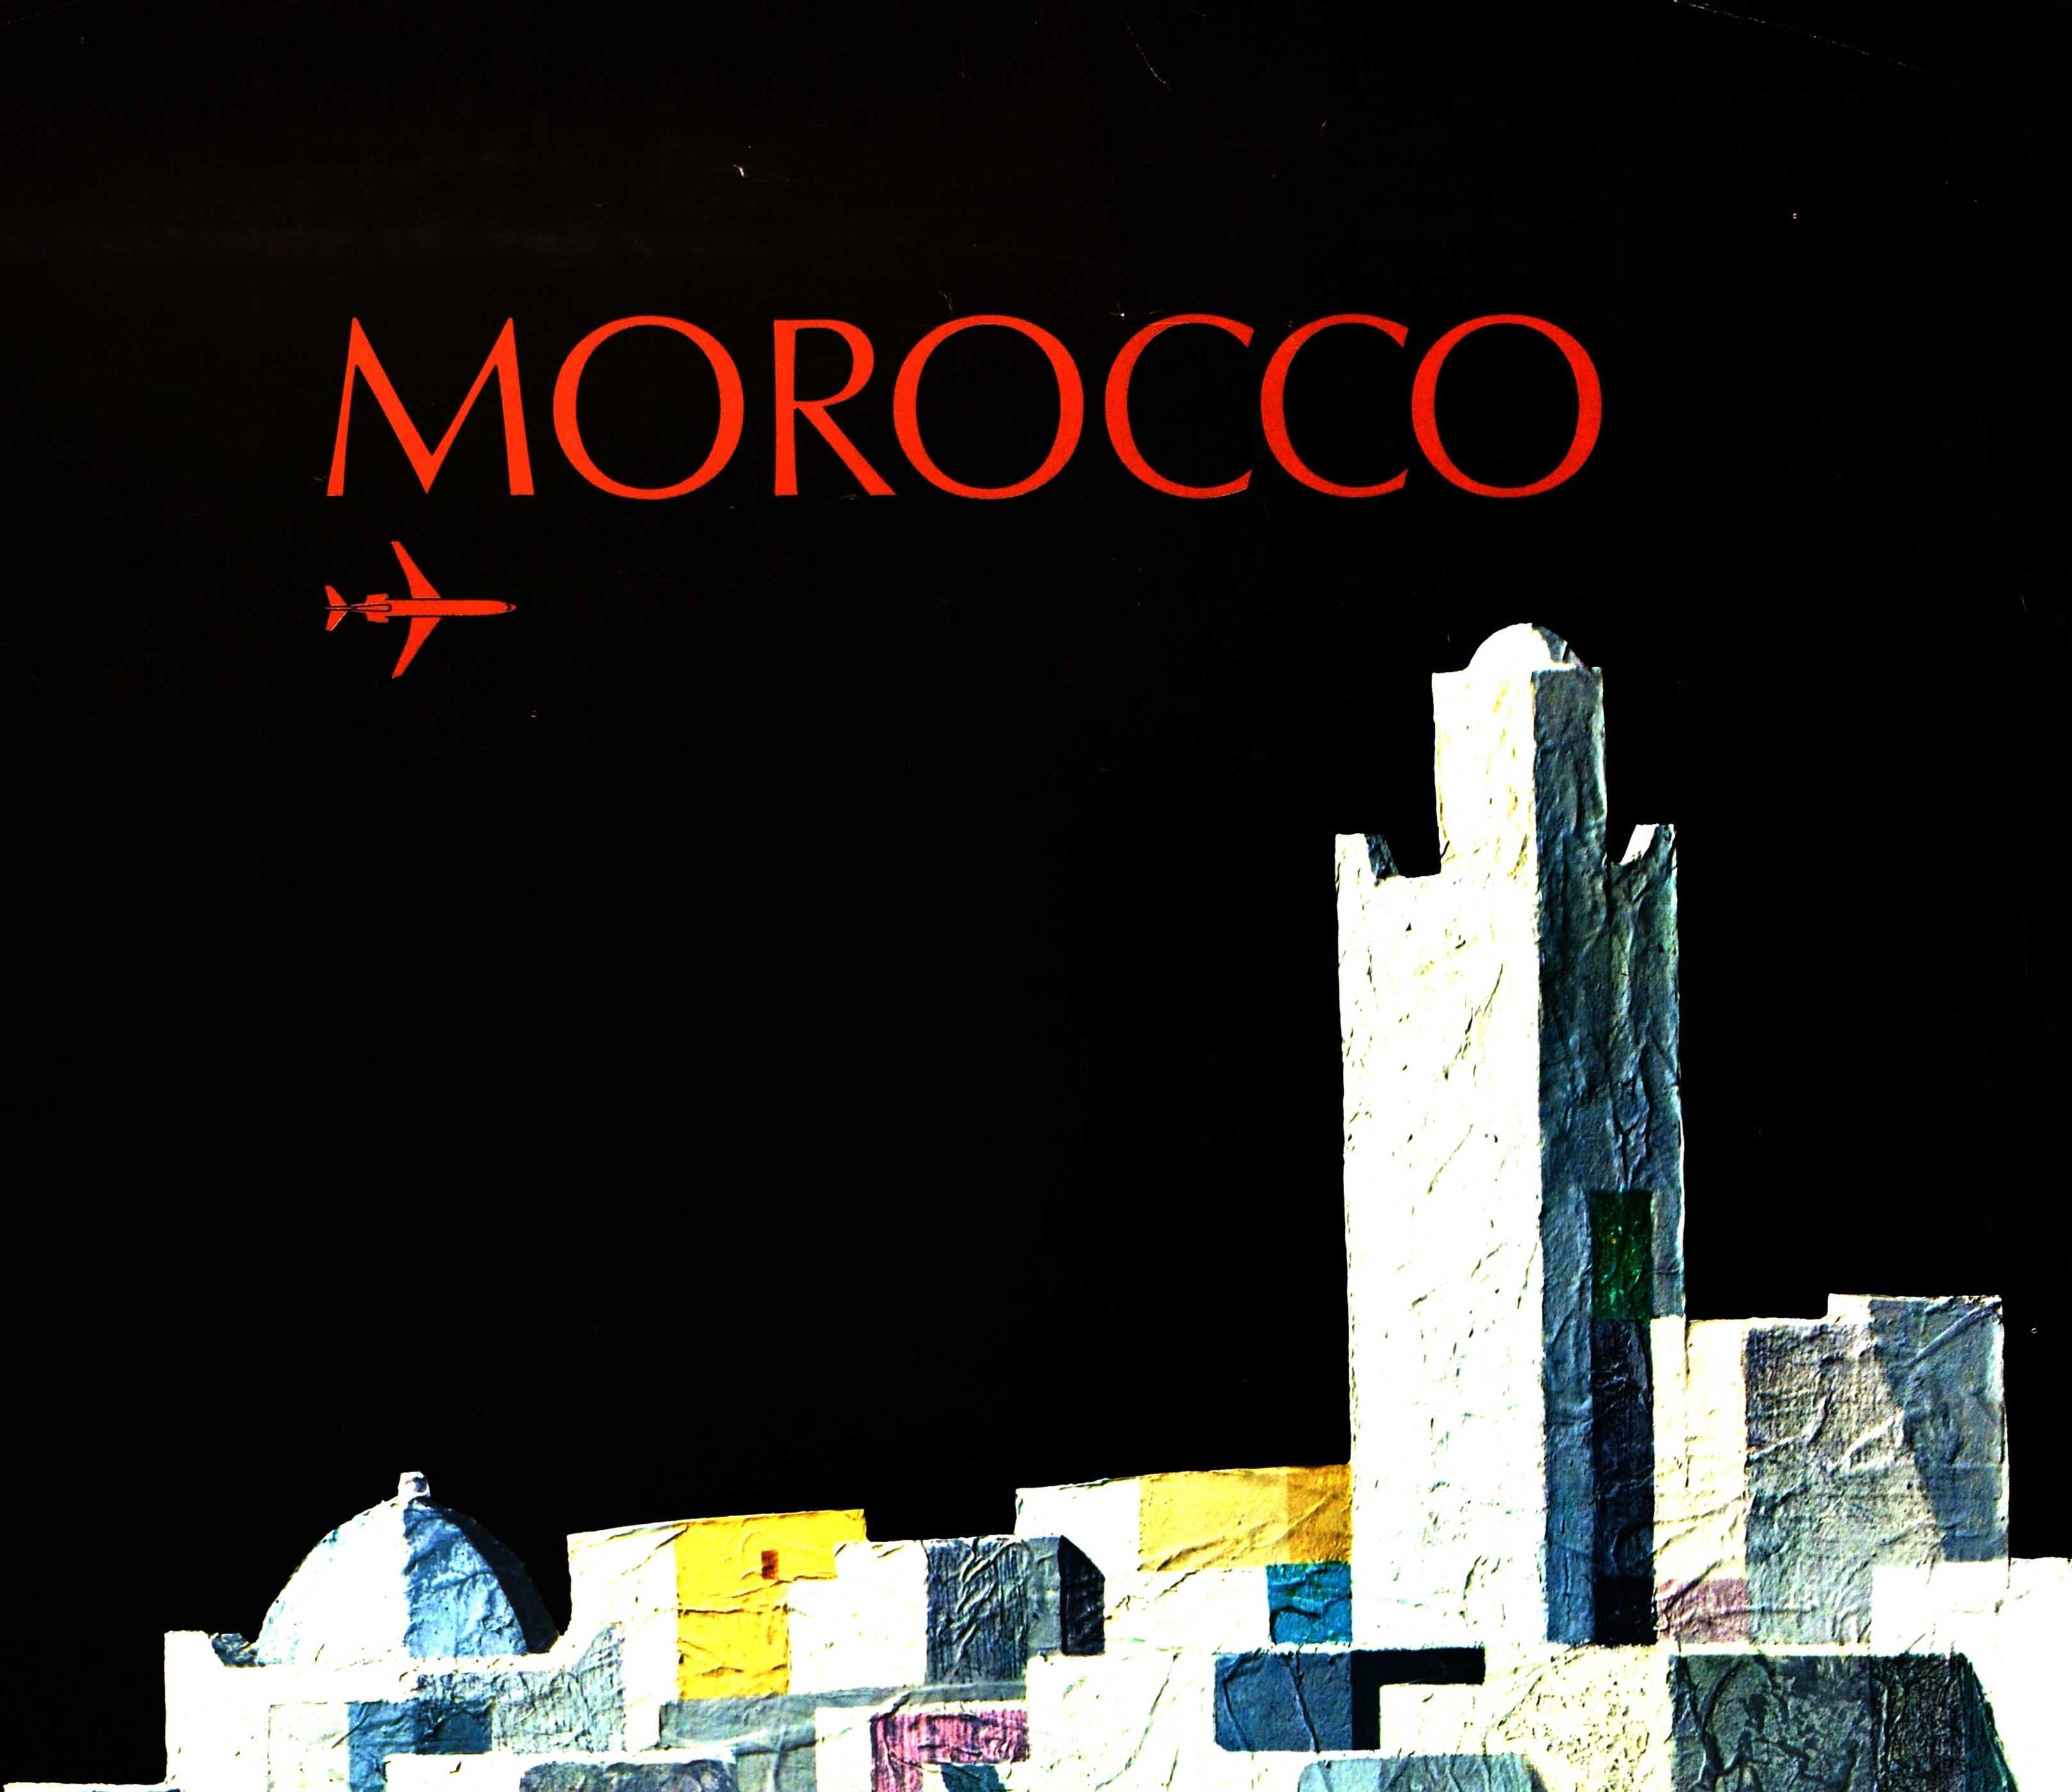 Original vintage travel advertising poster for Morocco Royal Air Maroc Moroccan International Airlines featuring stylized artwork depicting traditional Moroccan buildings with a plane flying overhead and the red text above and below against a black